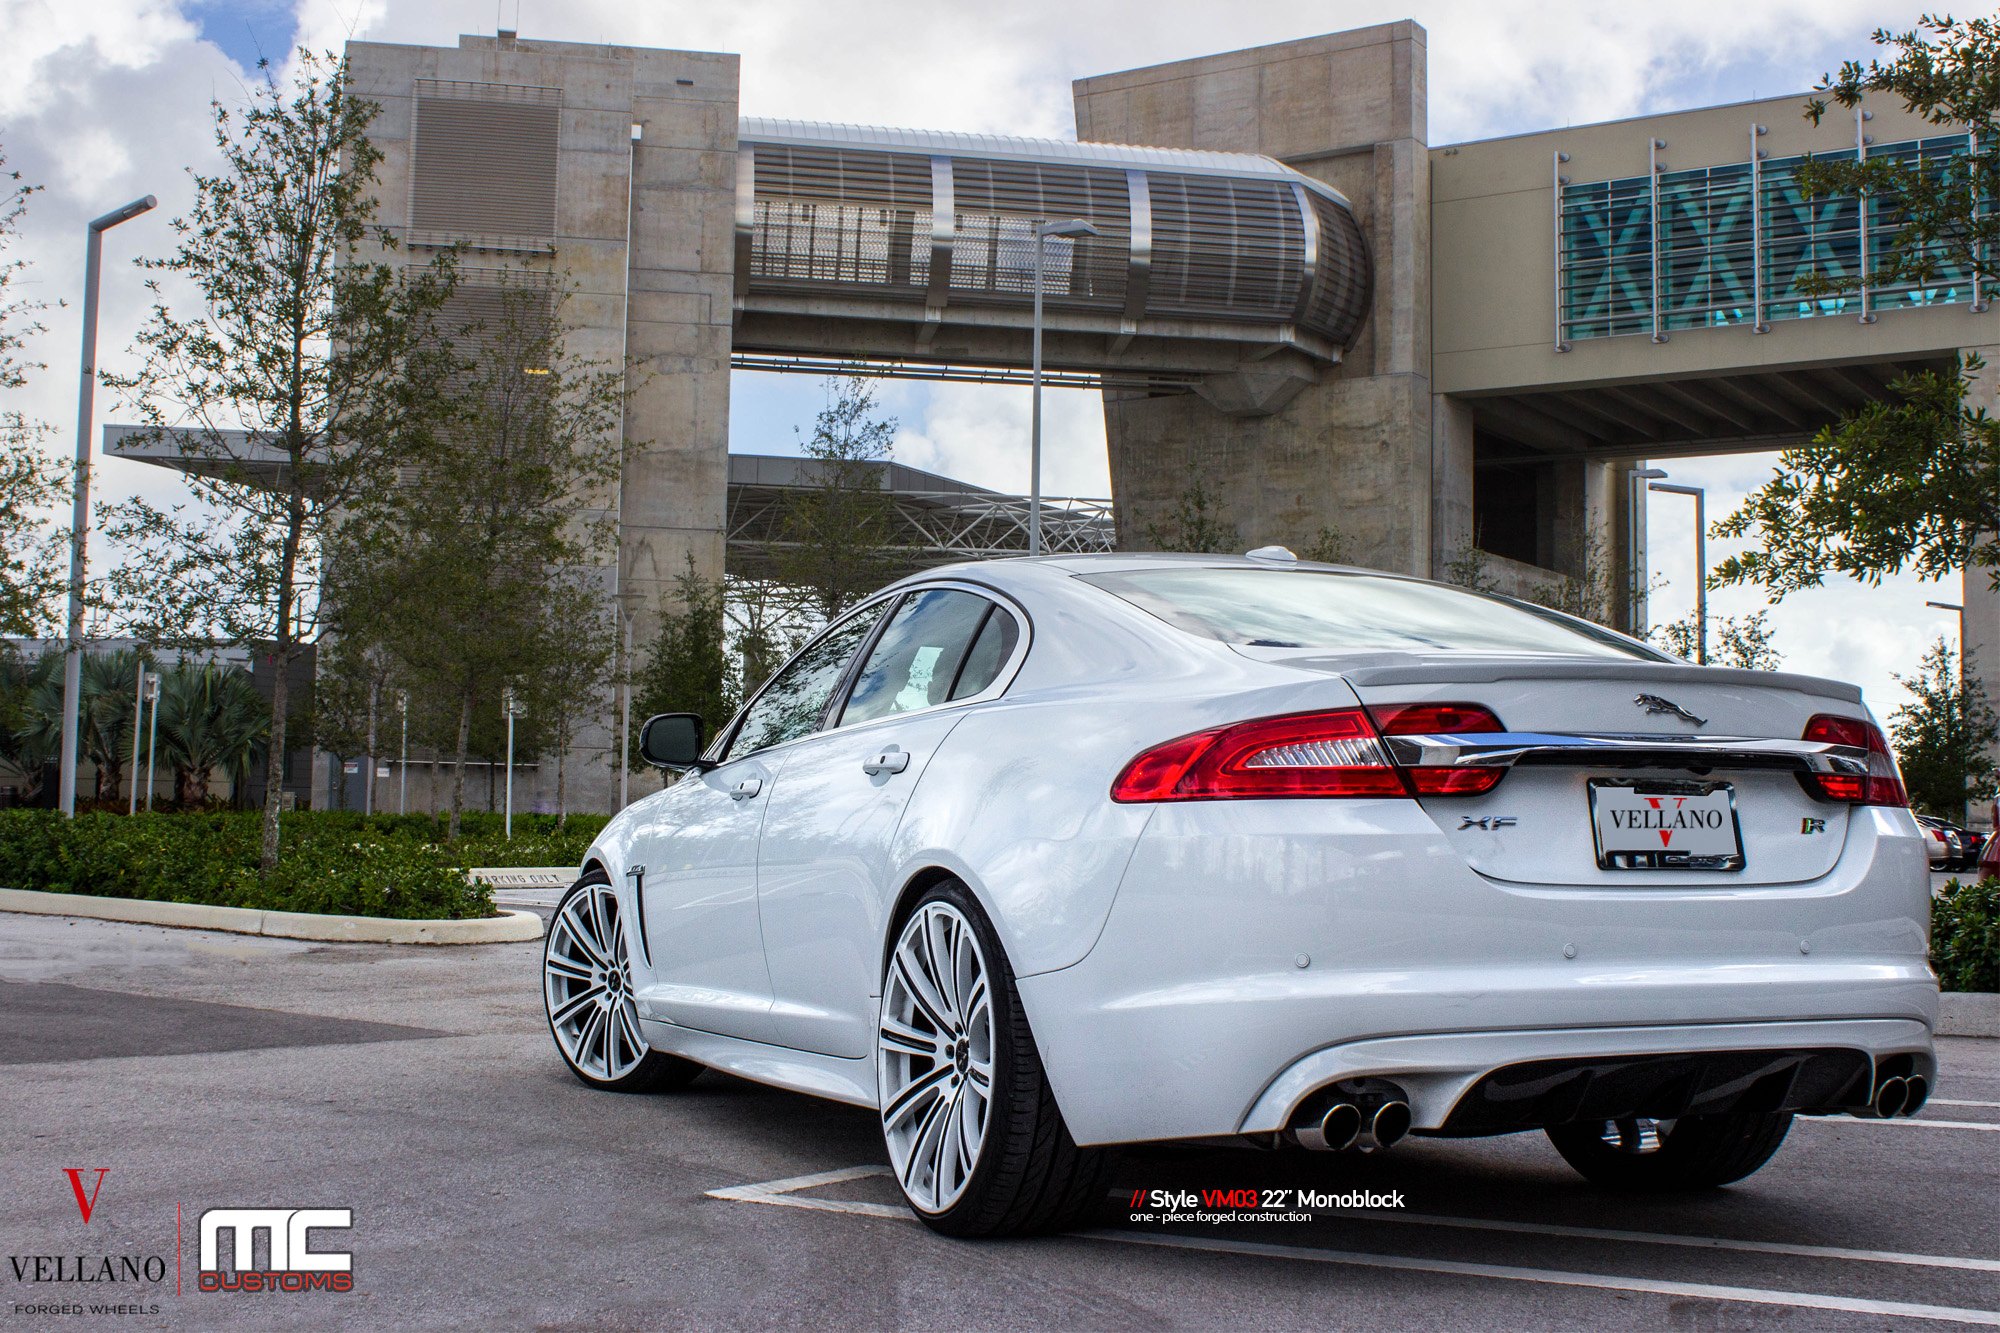 White Jaguar XF with Factory Style Rear Spoiler - Photo by Vellano